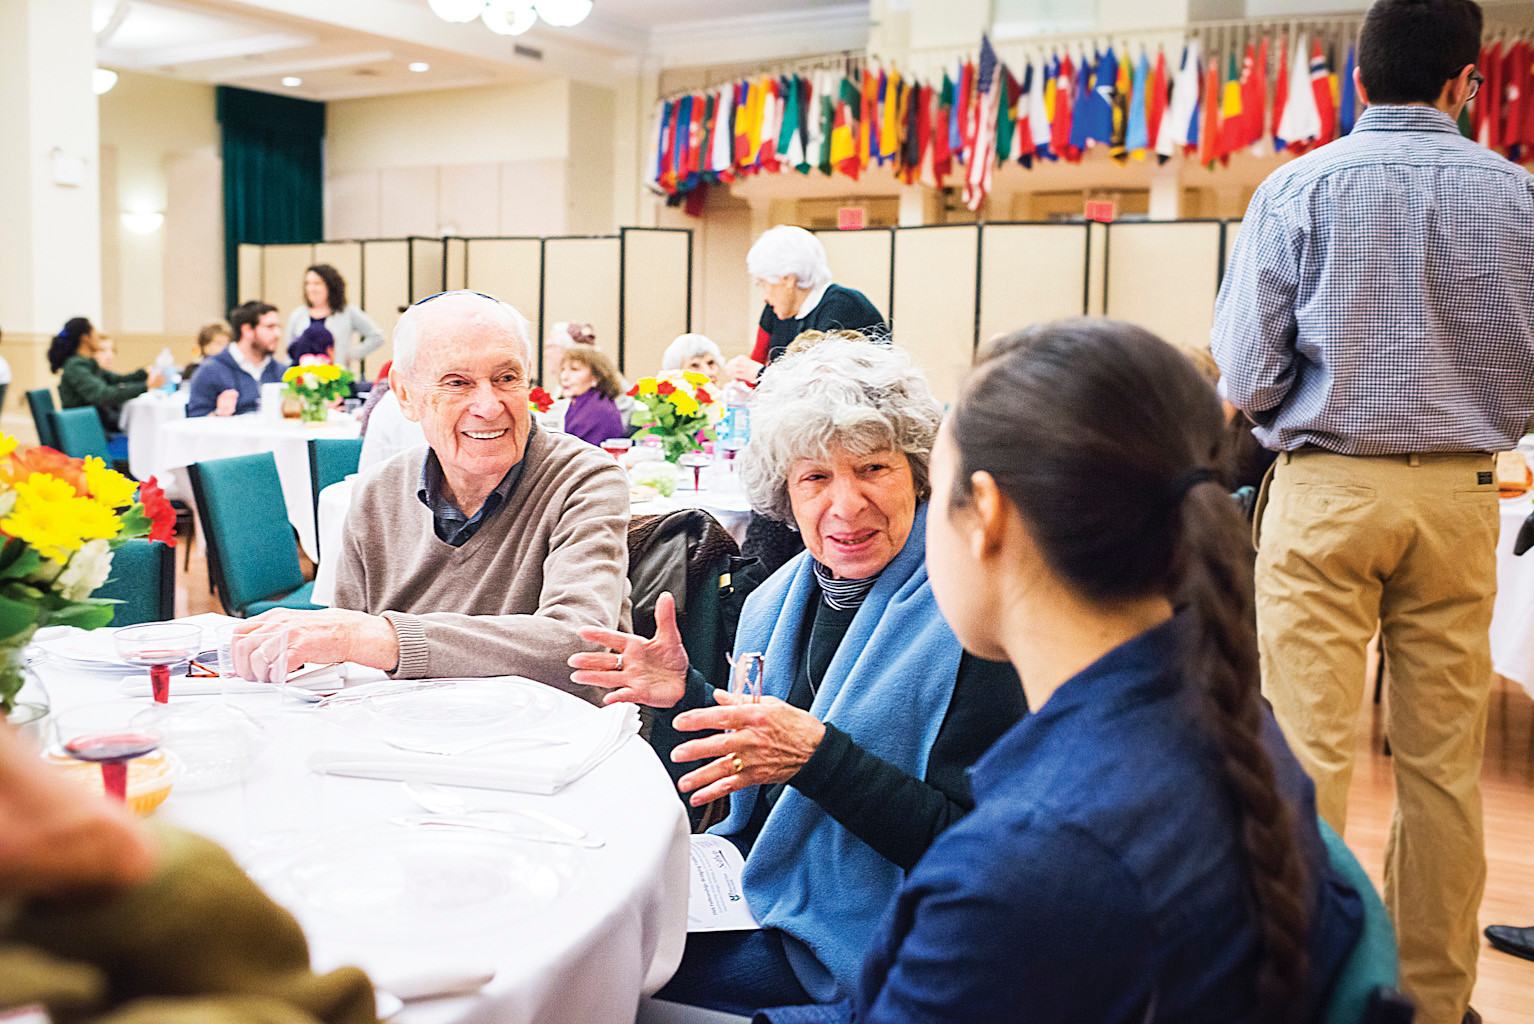 Riverdalian Faye Lieman, in the scarf, talks with students and fellow attendees at the Manhattan College seder celebration 'Bridging Faiths with Yeshiva Chovevei Torah' on Wednesday.